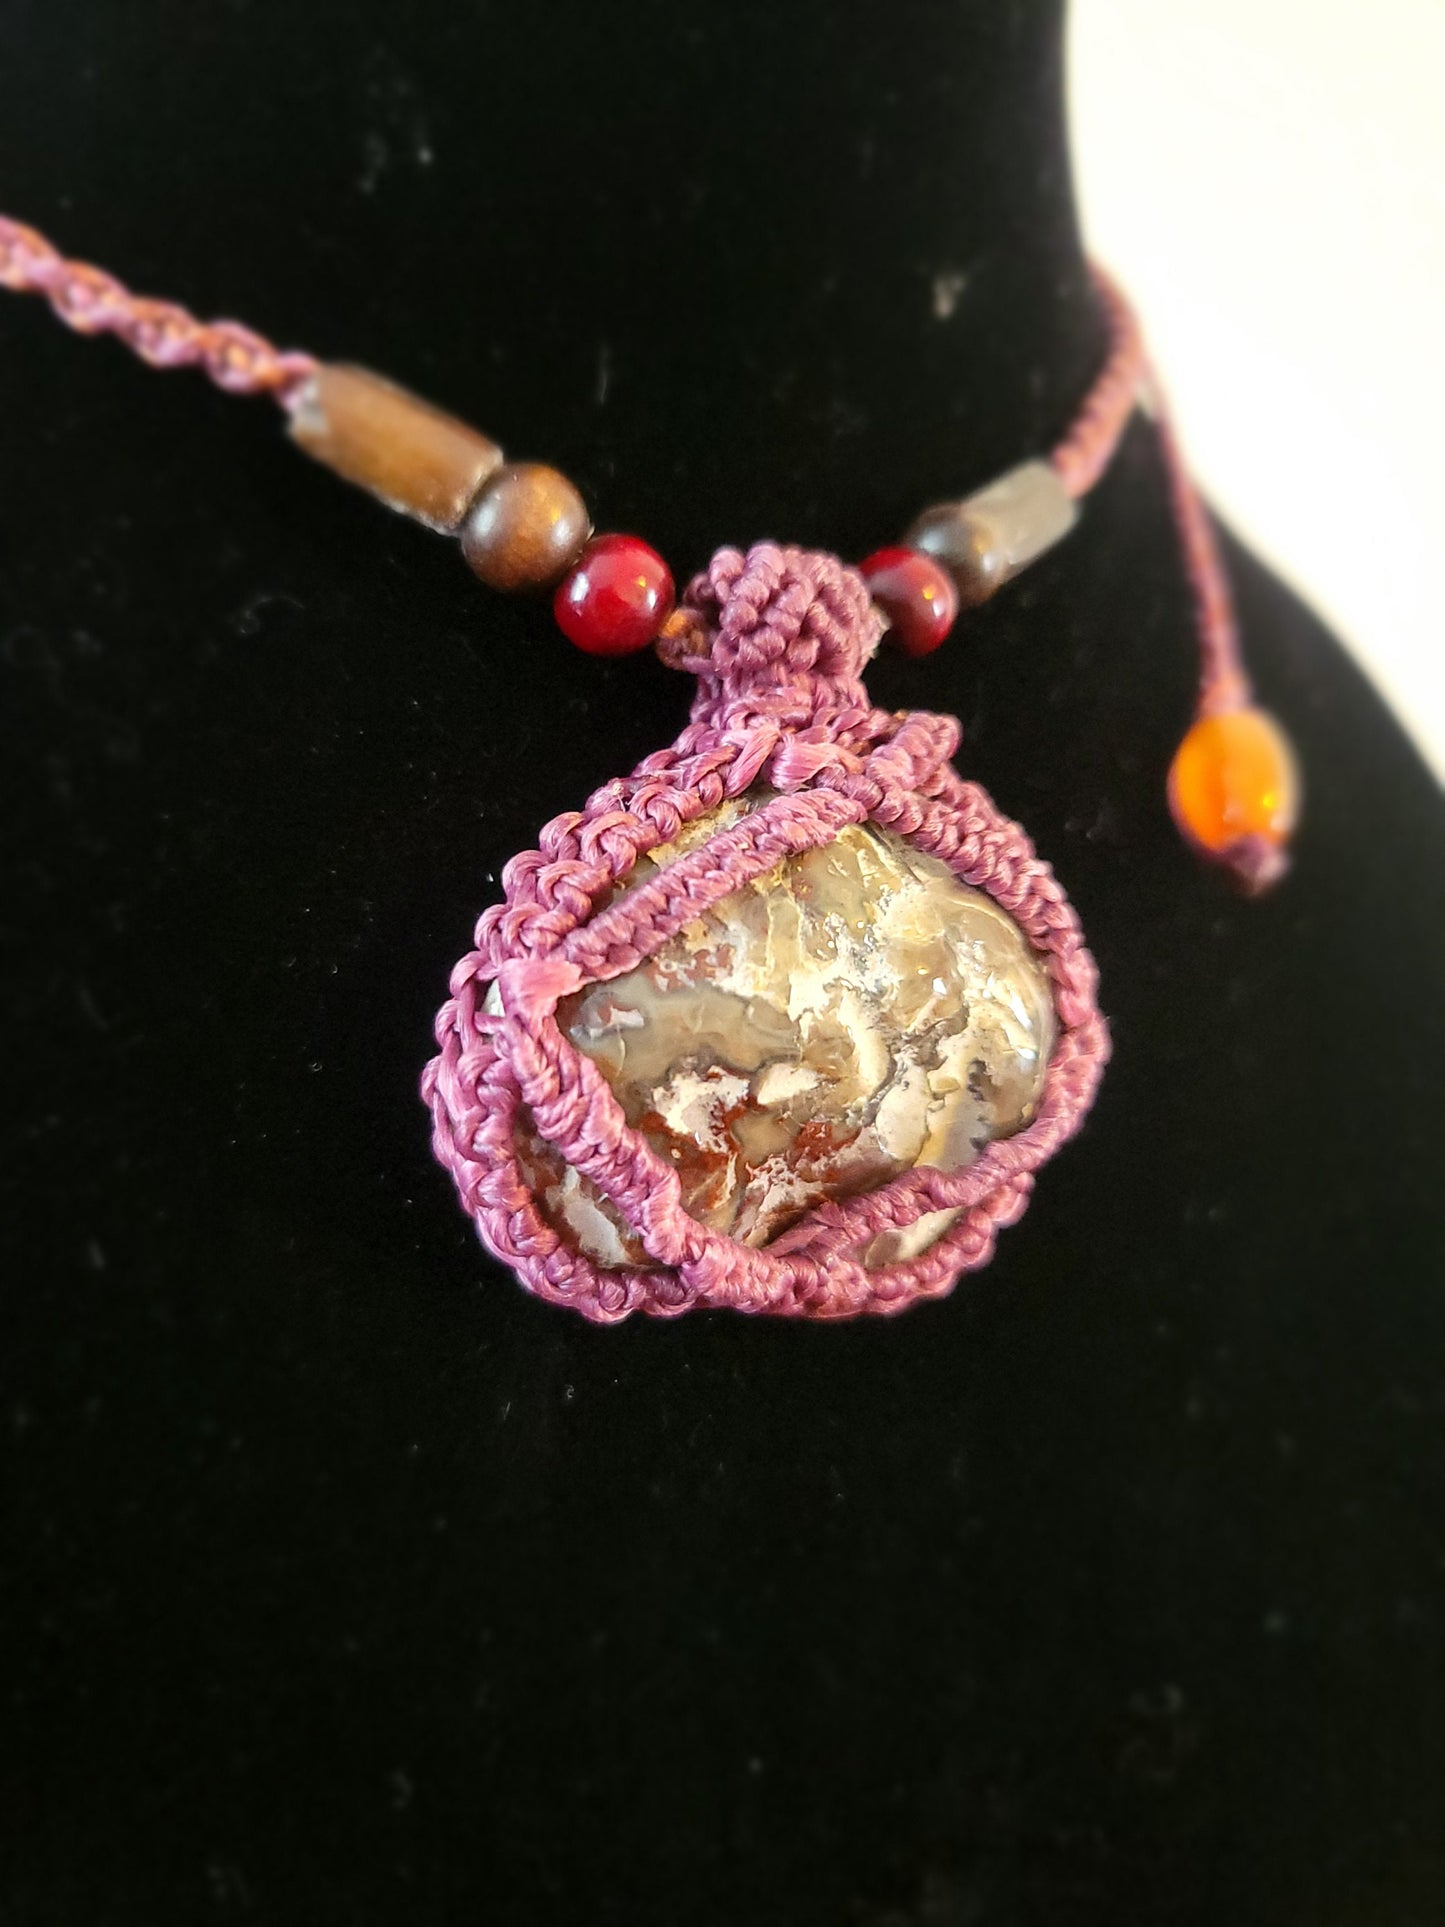 Dryhead Agate Stone Pendant Necklace - Wrapped in Pink Cotton Cord - Adjustable and Sustainable Bohemian Jewelry